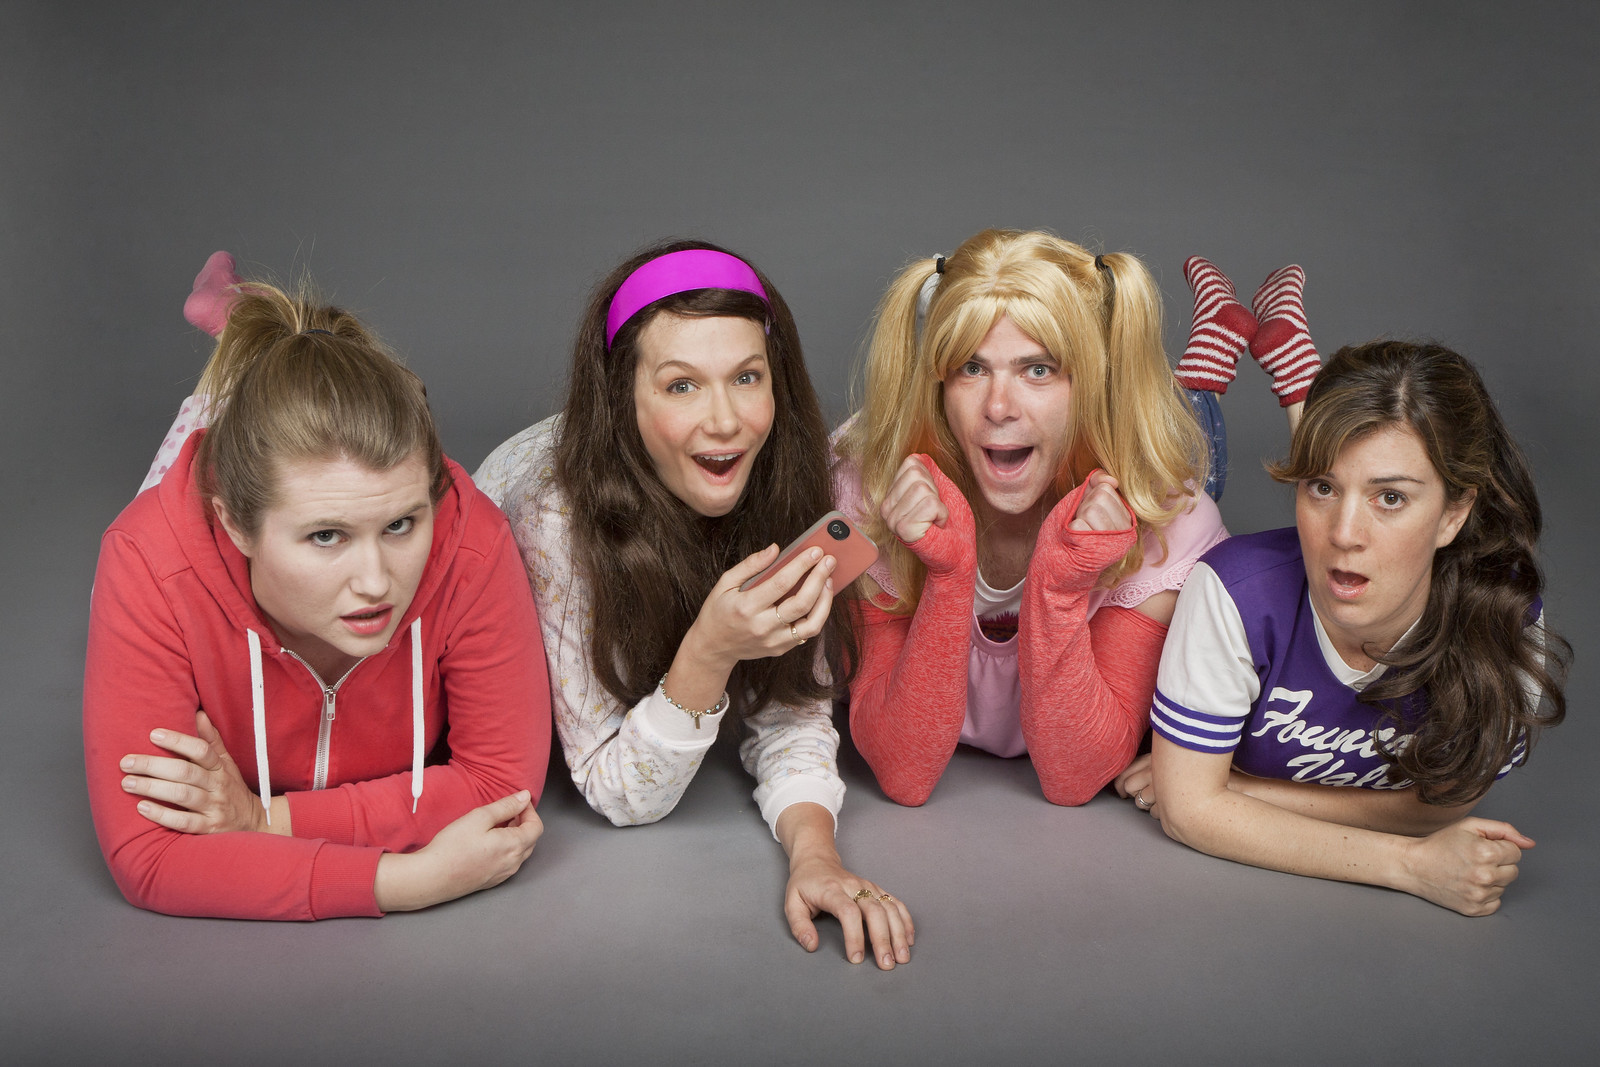 Jillian Bell, Charlotte Newhouse, Mikey Day, and Lisa Schurga